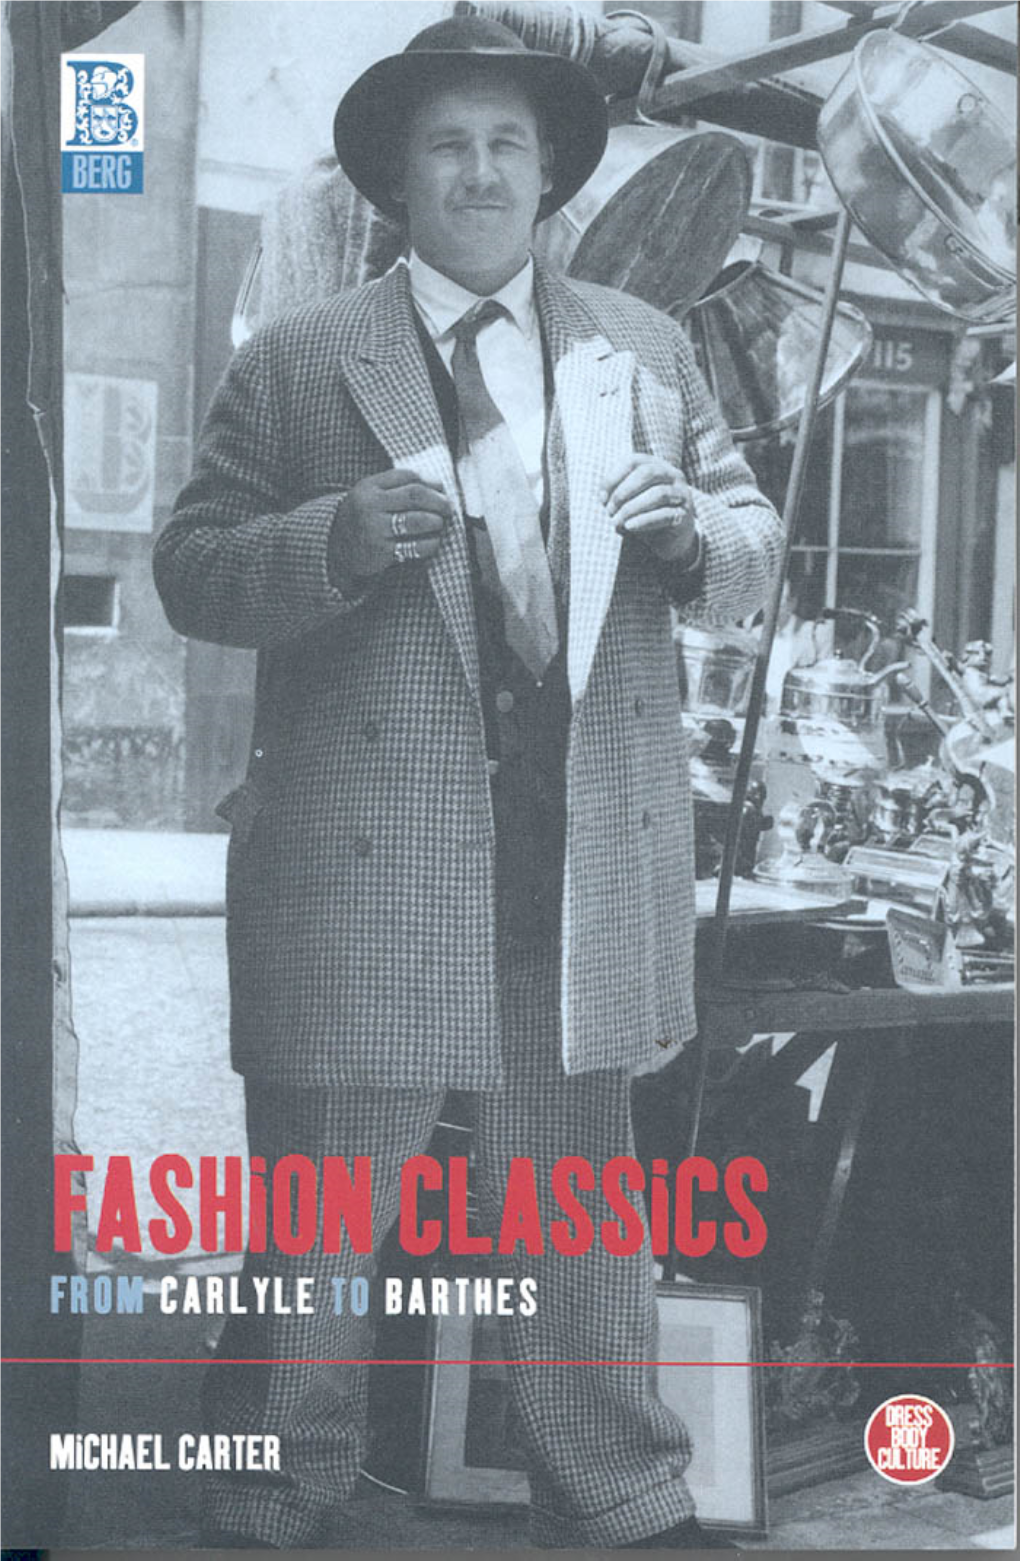 Clothes and Fashion 59 5 Alfred Kroeber and the Great Secular Wave 83 6 J